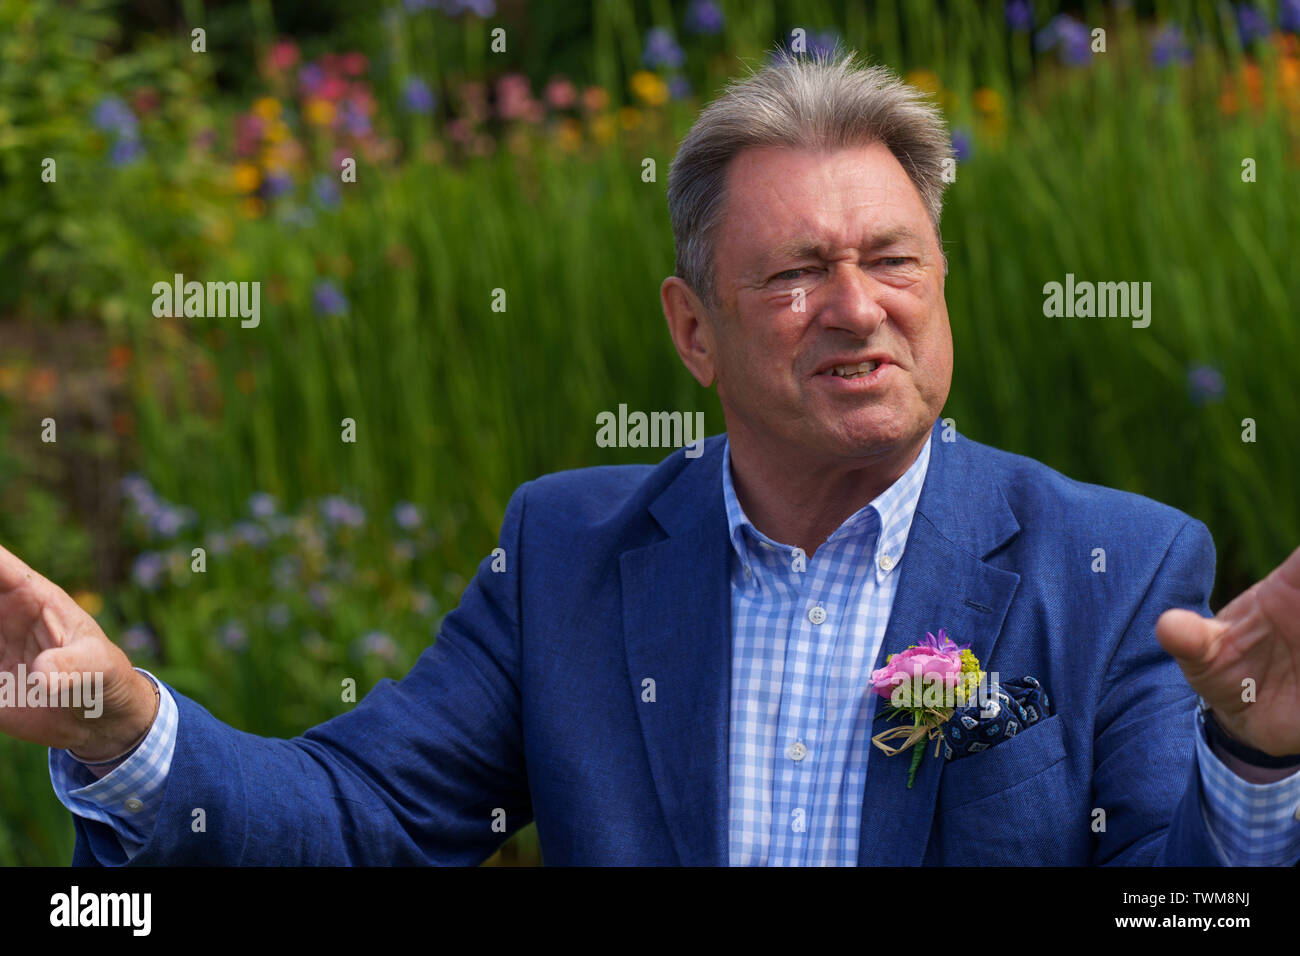 Gardener & Broadcaste Alan Titchmarsh at RHS Garden Harlow Carr Flower Show to mark the 70th year of the gardens, Harrogate, North Yorkshire, UK. Stock Photo